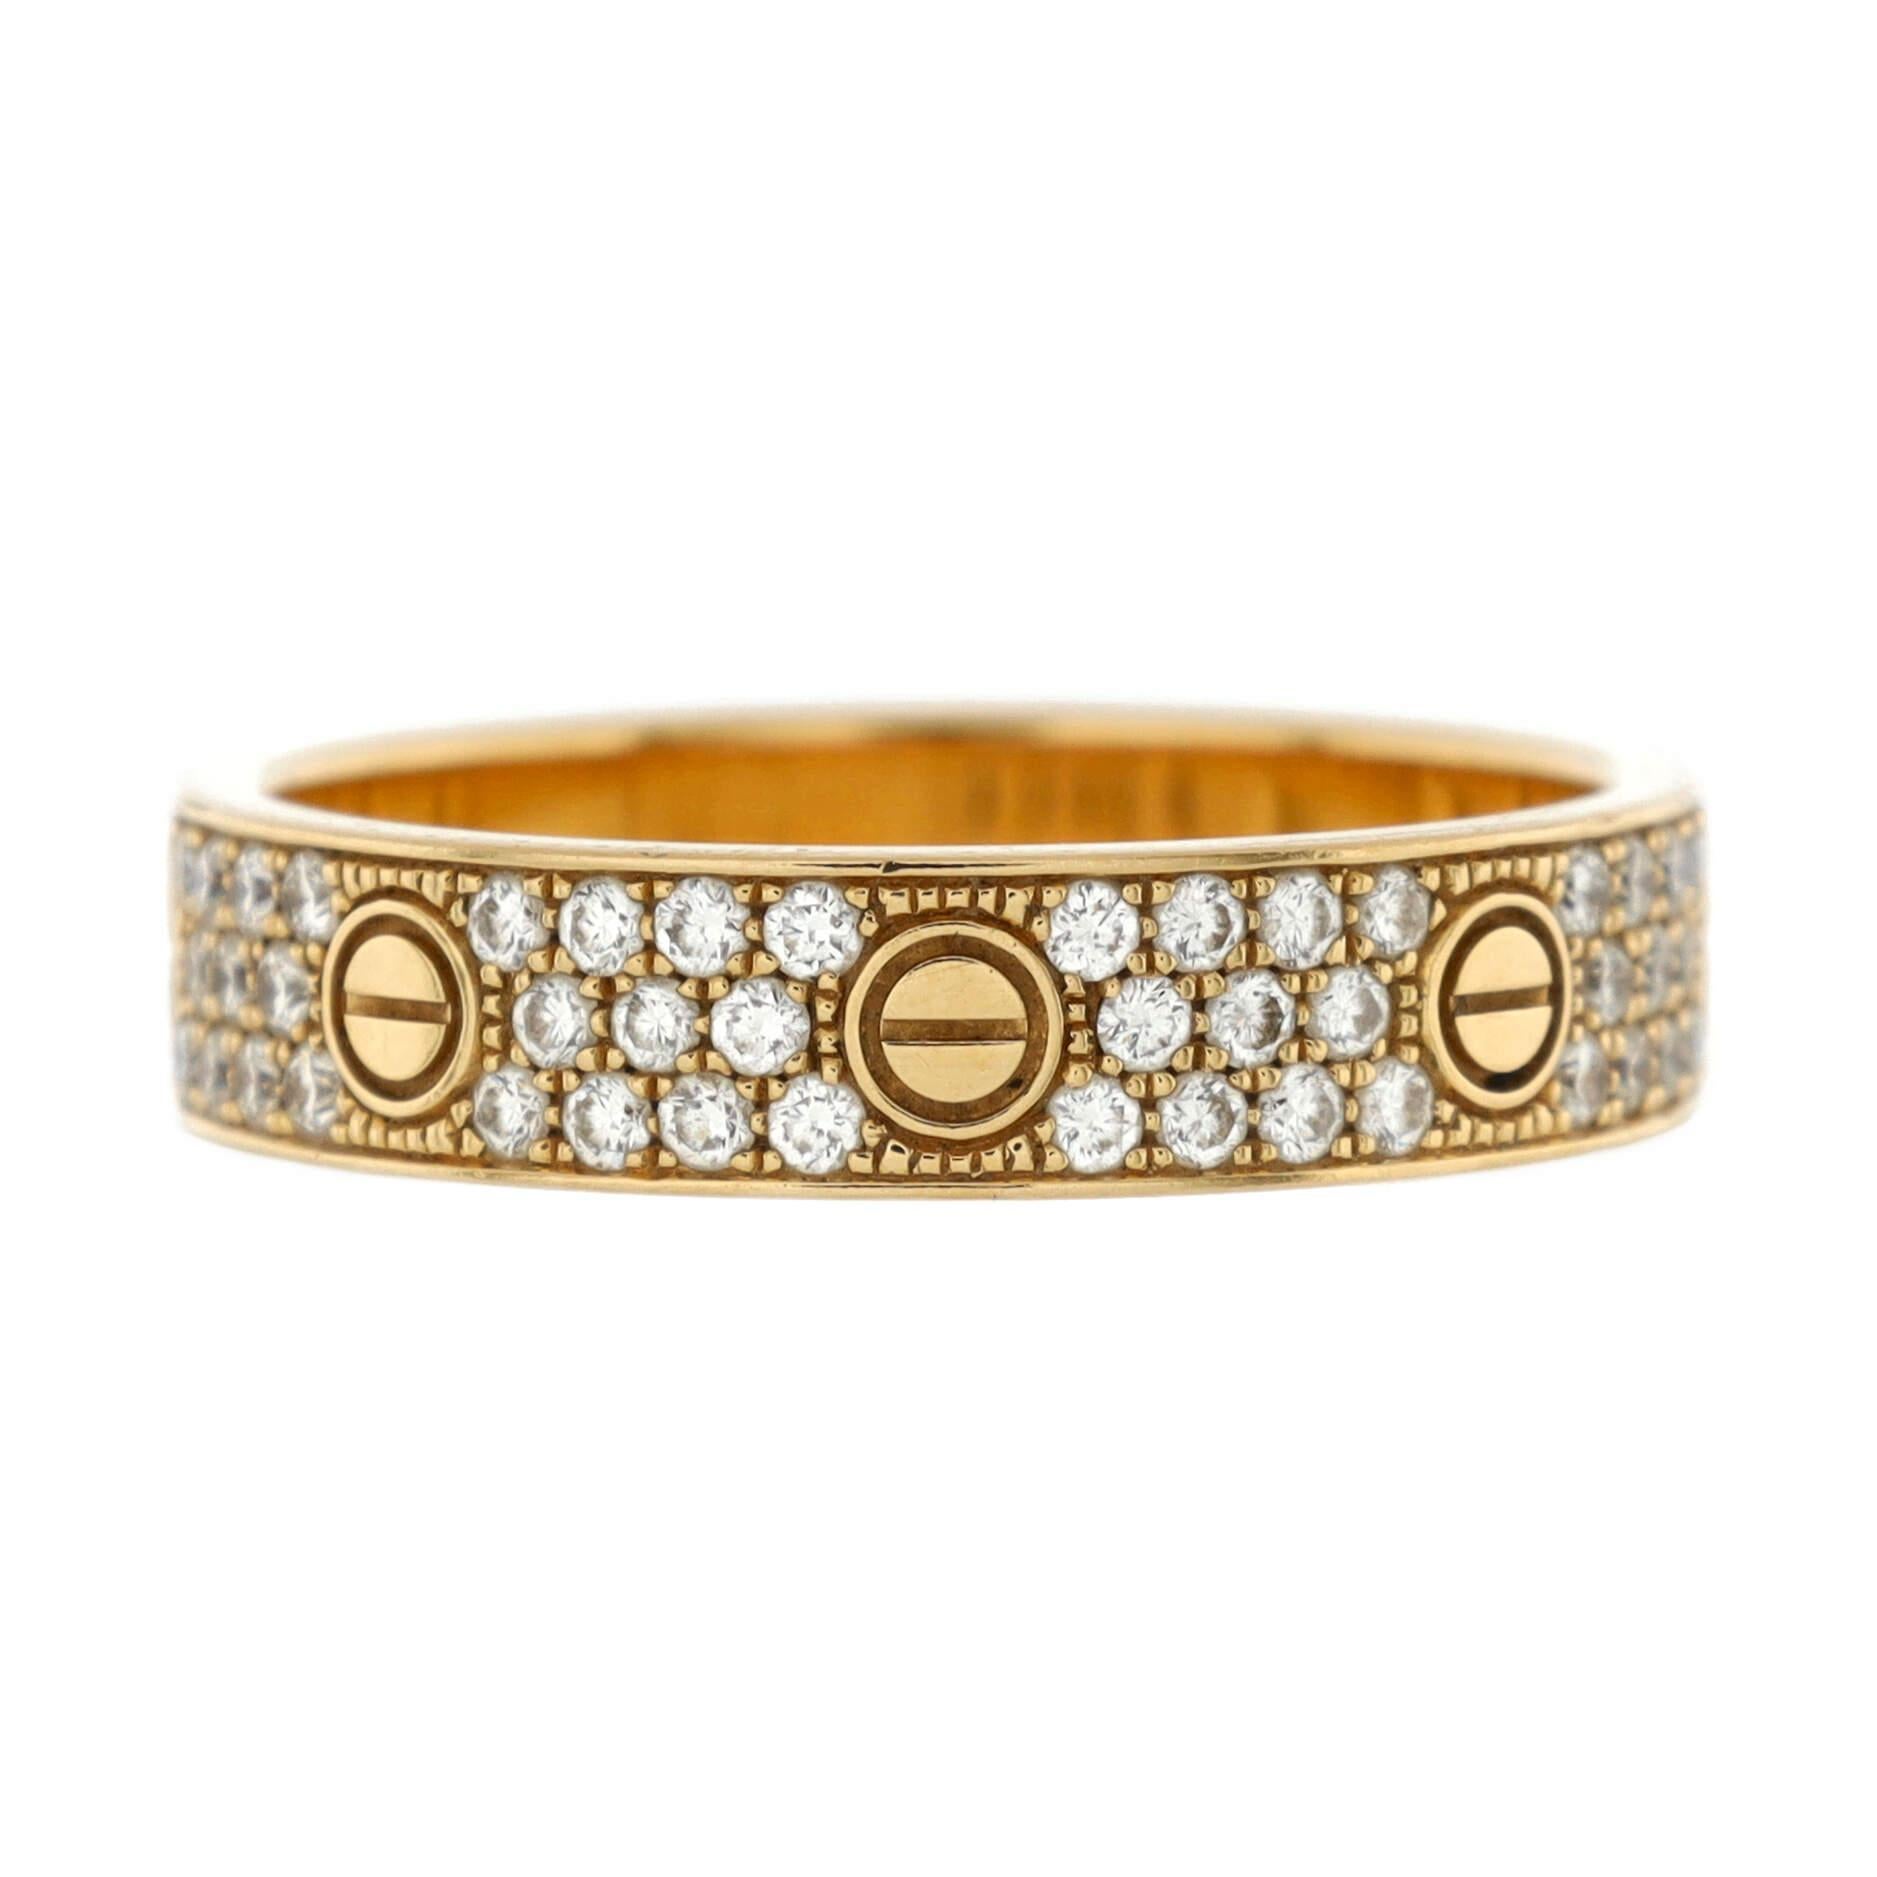 Condition: Very good. Moderate wear throughout.
Accessories: No Accessories
Measurements: Size: 8.75 - 59, Width: 4.85 mm
Designer: Cartier
Model: Love Wedding Band Pave Diamonds Ring 18K Yellow Gold and Diamonds
Exterior Color: Yellow Gold
Item